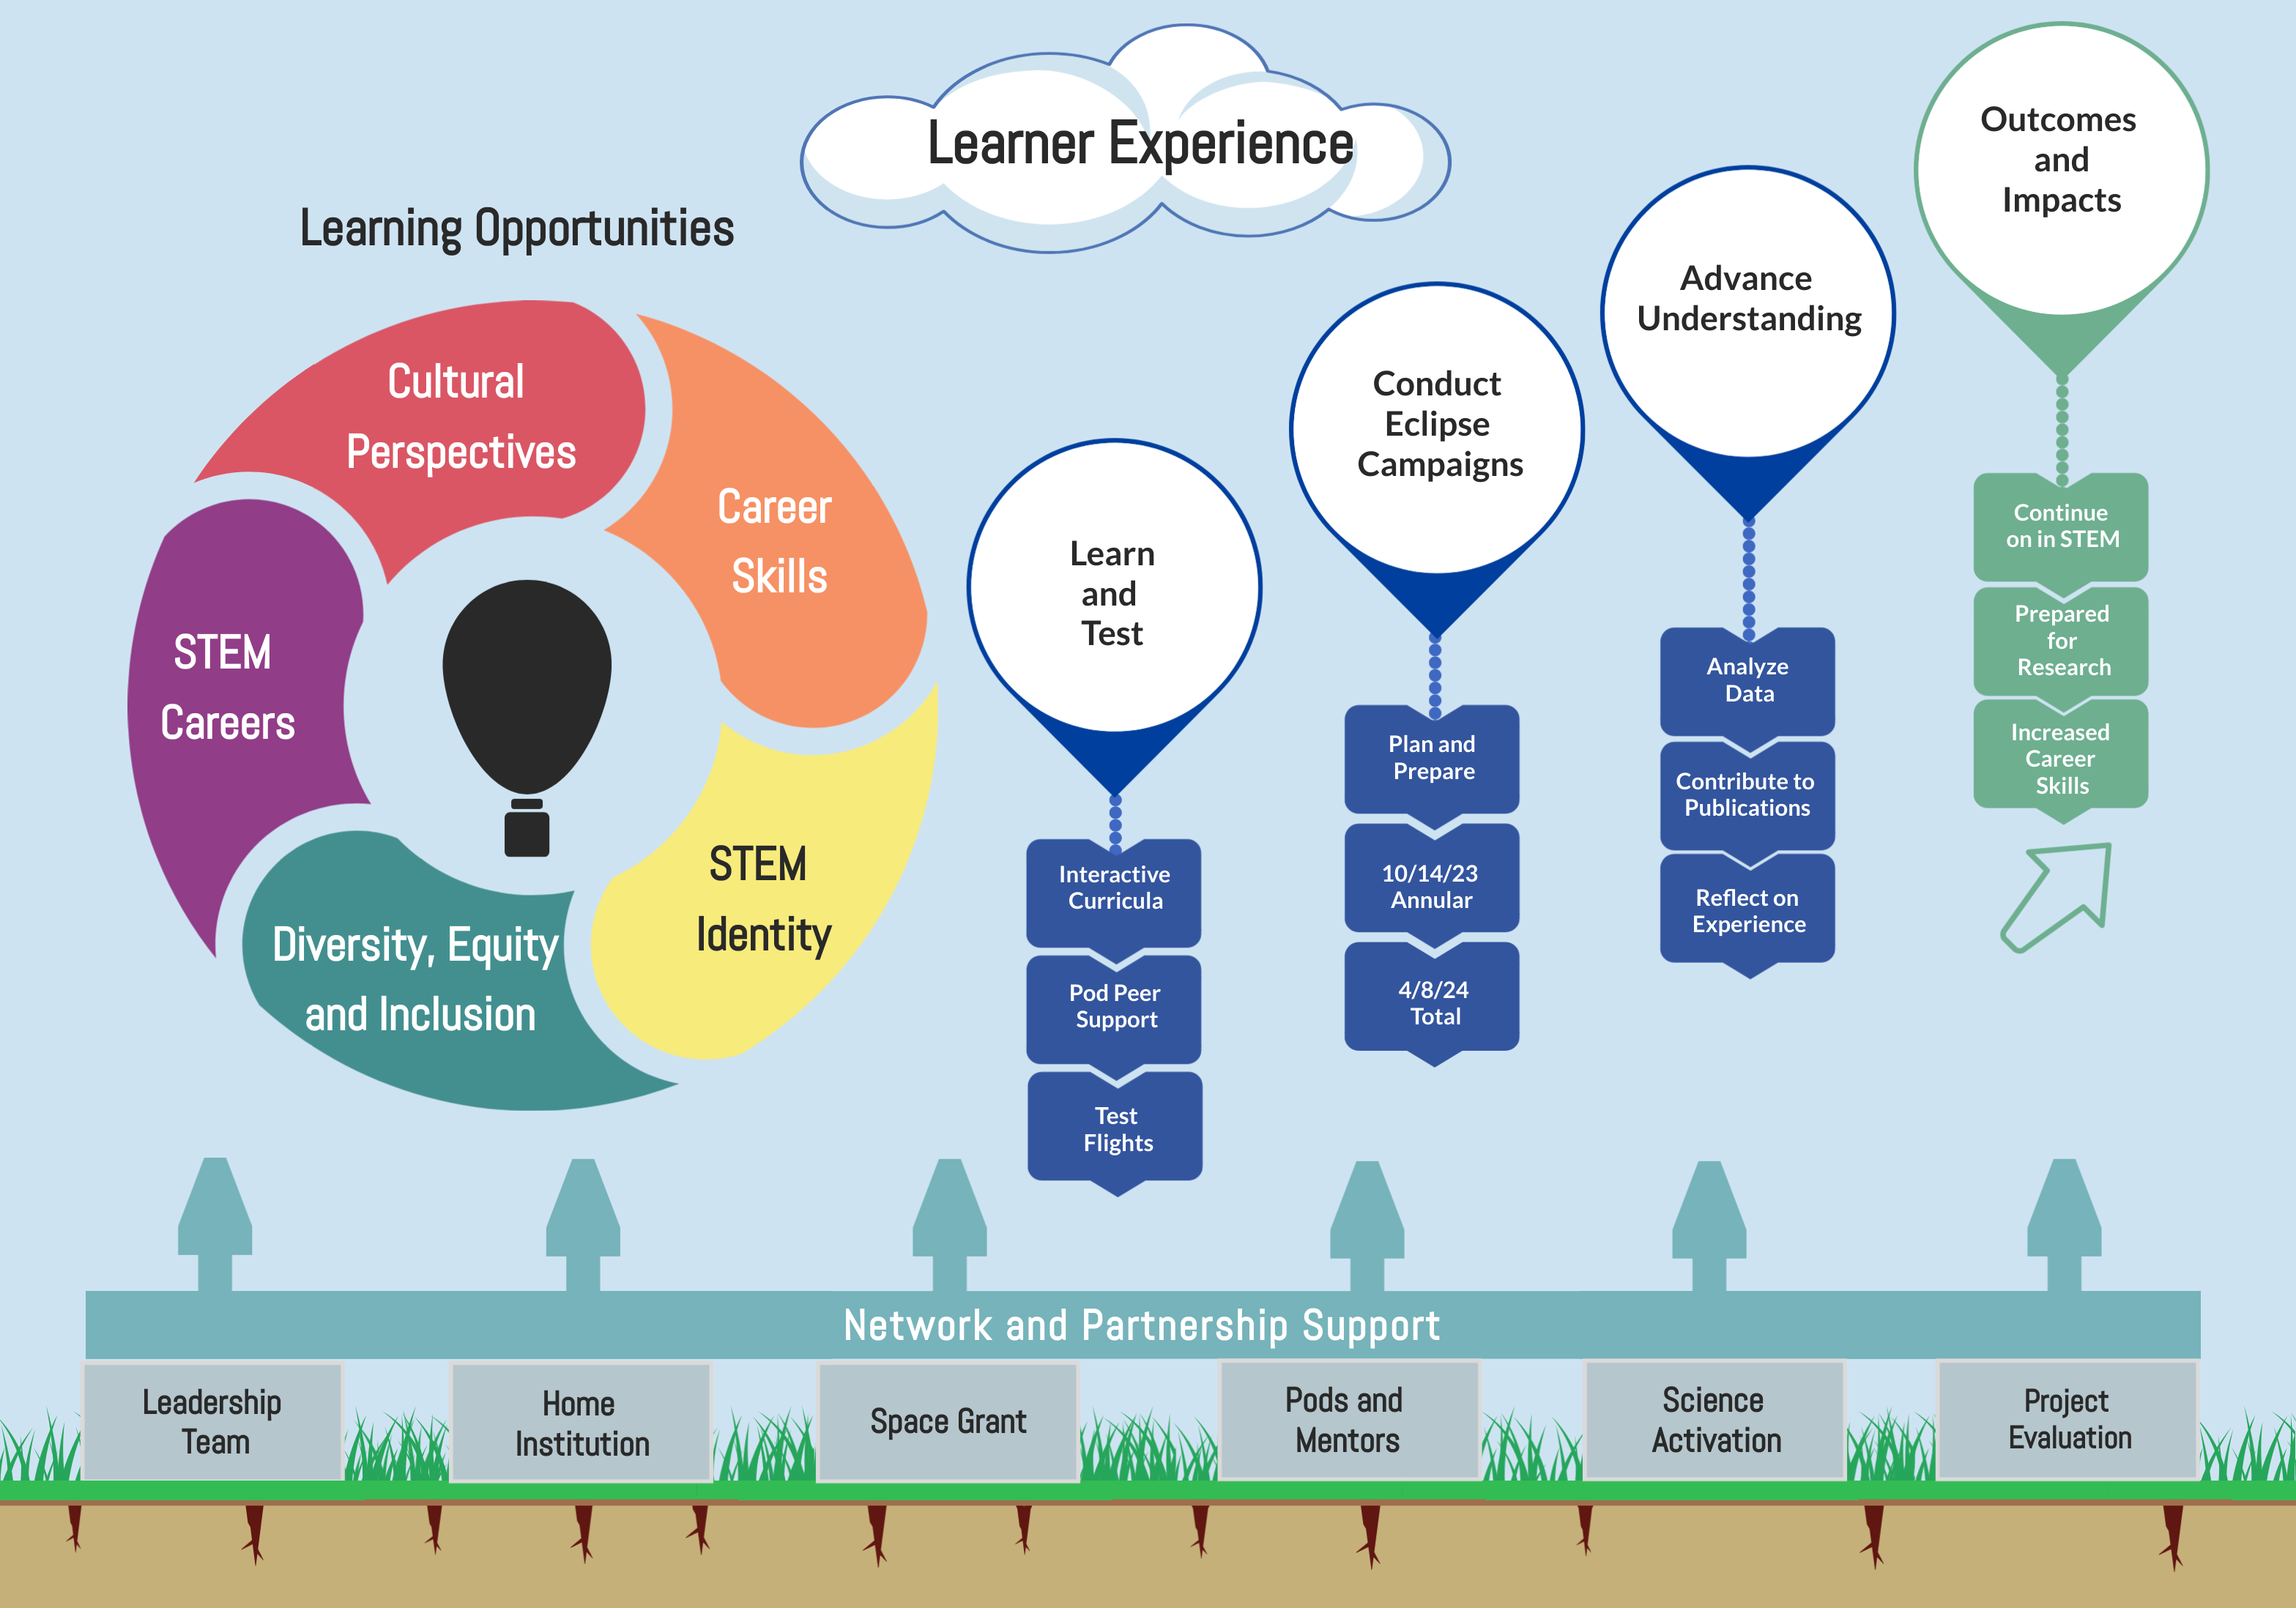 Diagram showing the learning experience: learning opportunities in a colorful circle (career skills, STEM identity, diversity equity and inclusion, STEM careers, and cultural perspectives); network and partnership support (leadership team, home institution, Space Grant, Pods and Mentors, Science Activation, and Project evaluation); project components (learn and test, conduct eclipse campaigns, advance understanding, and outcomes and impacts).